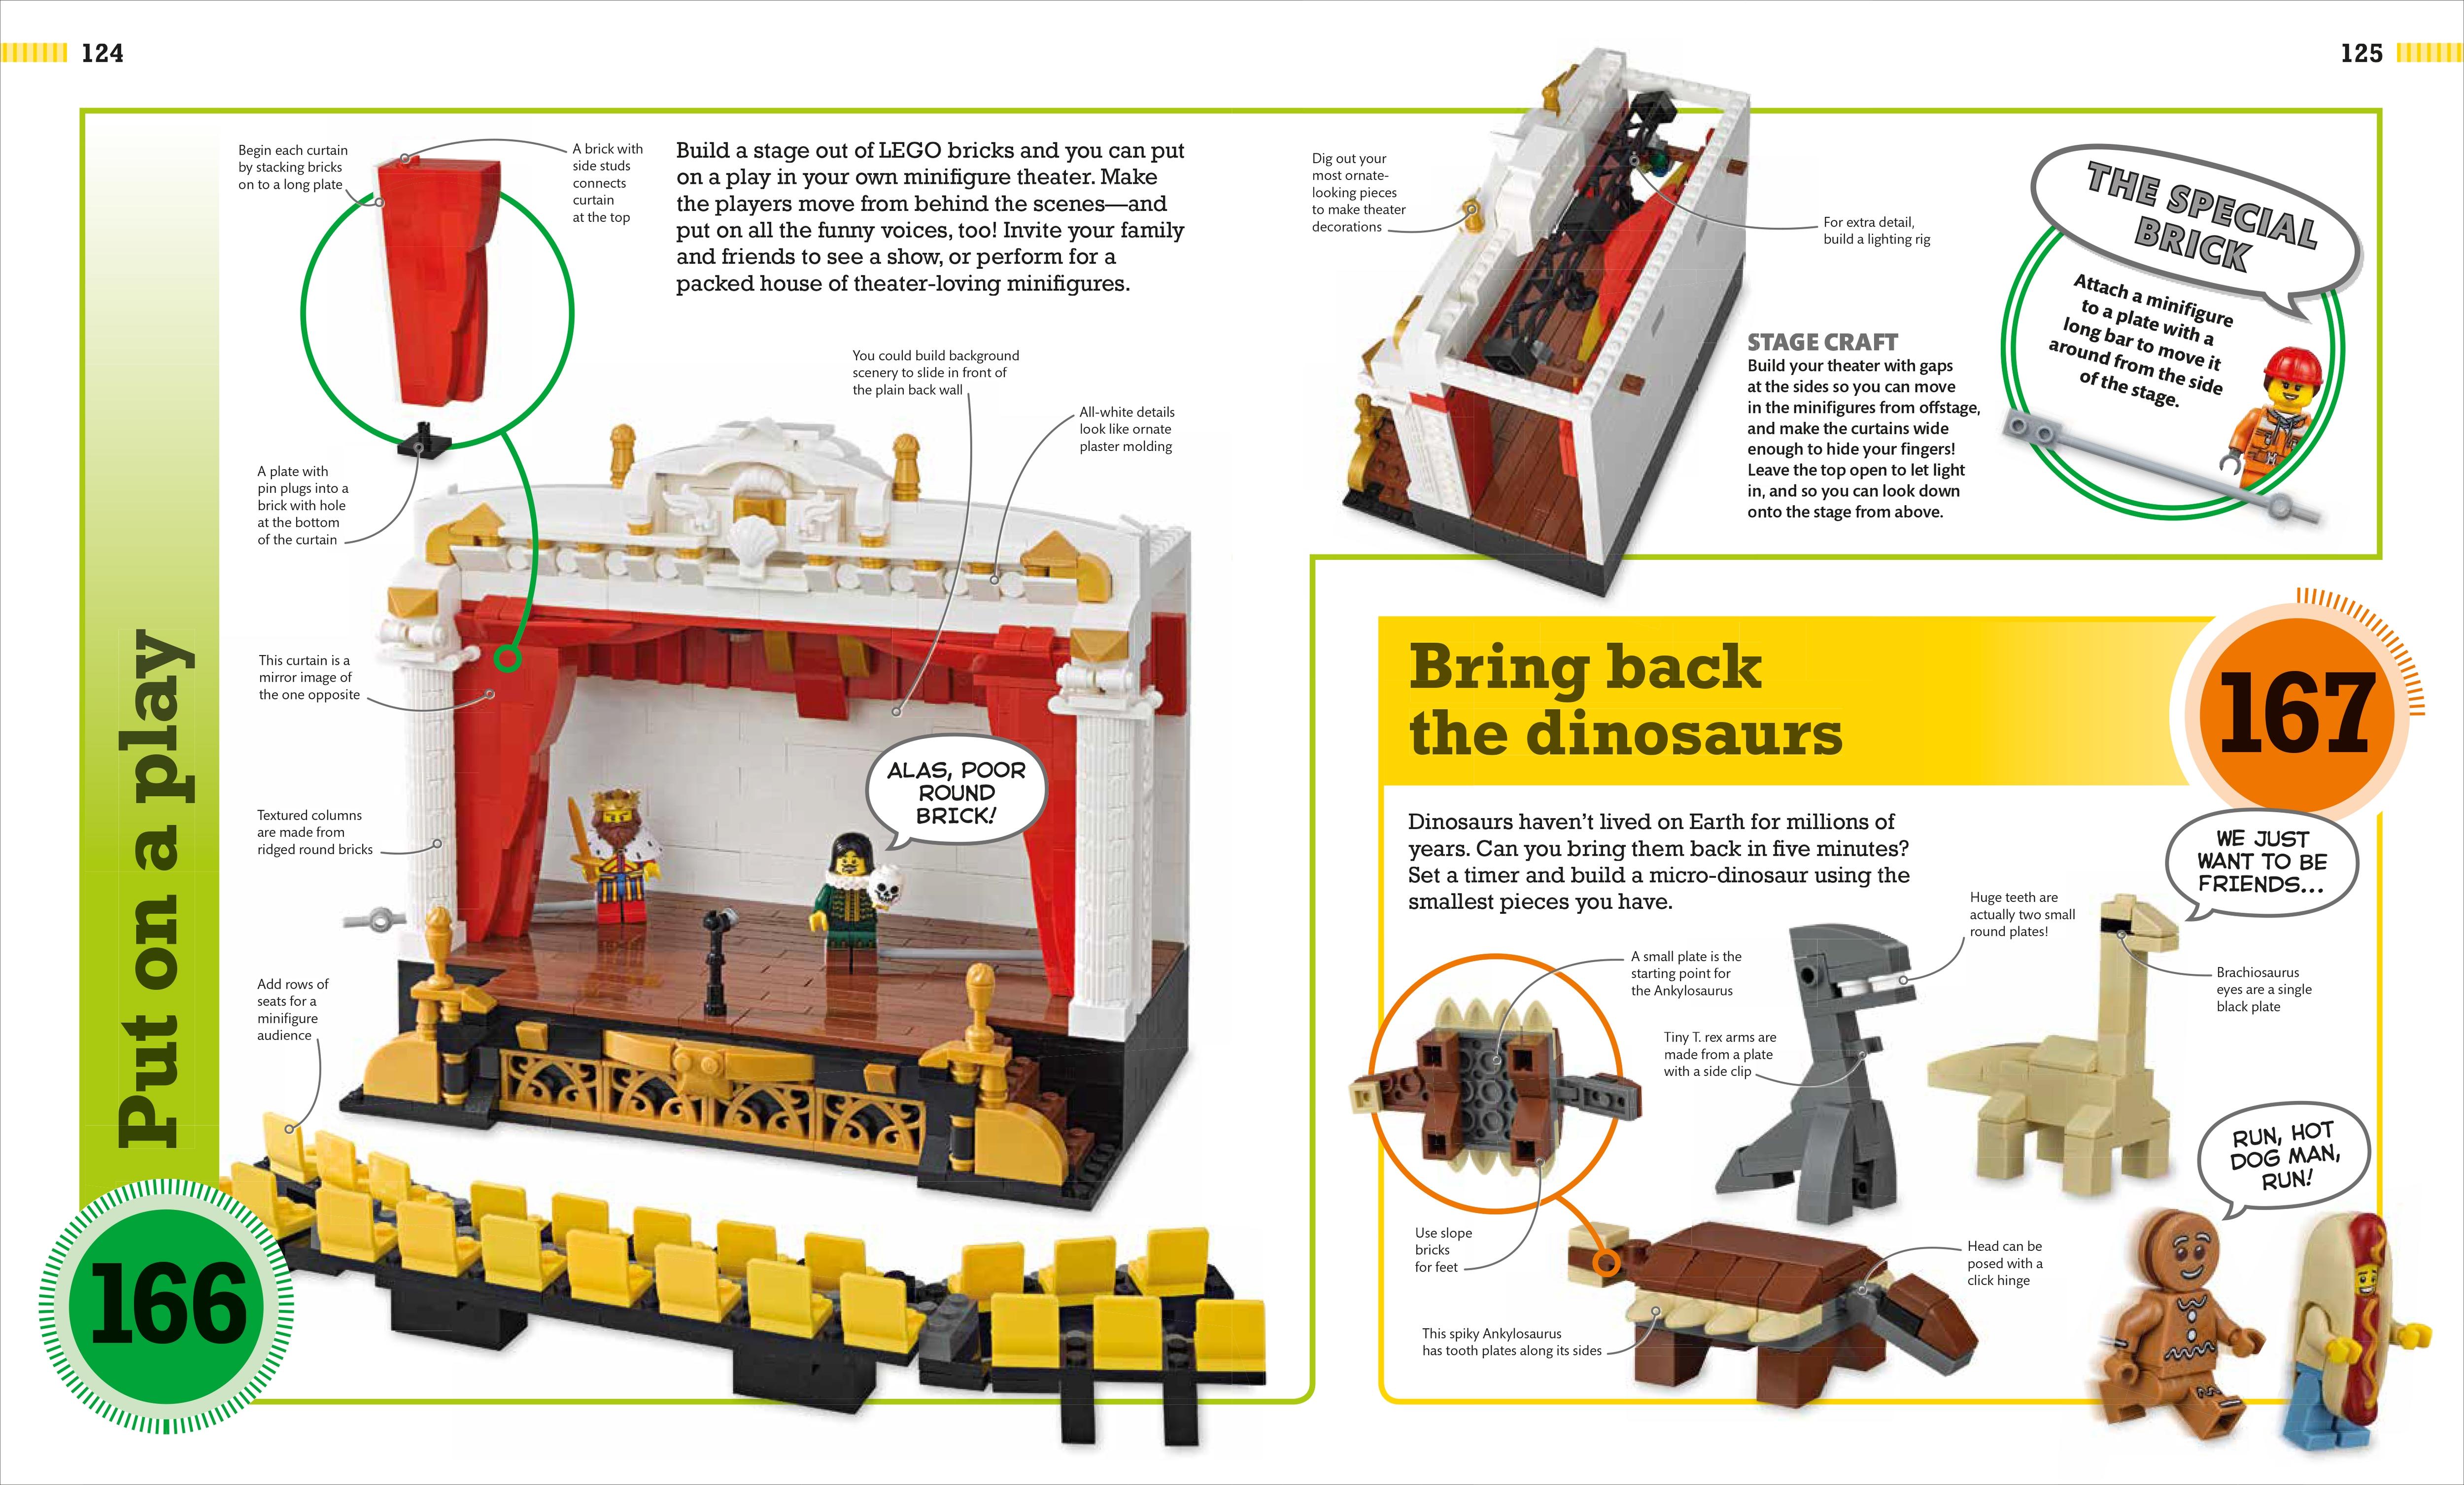 365 things to do with lego bricks instructions